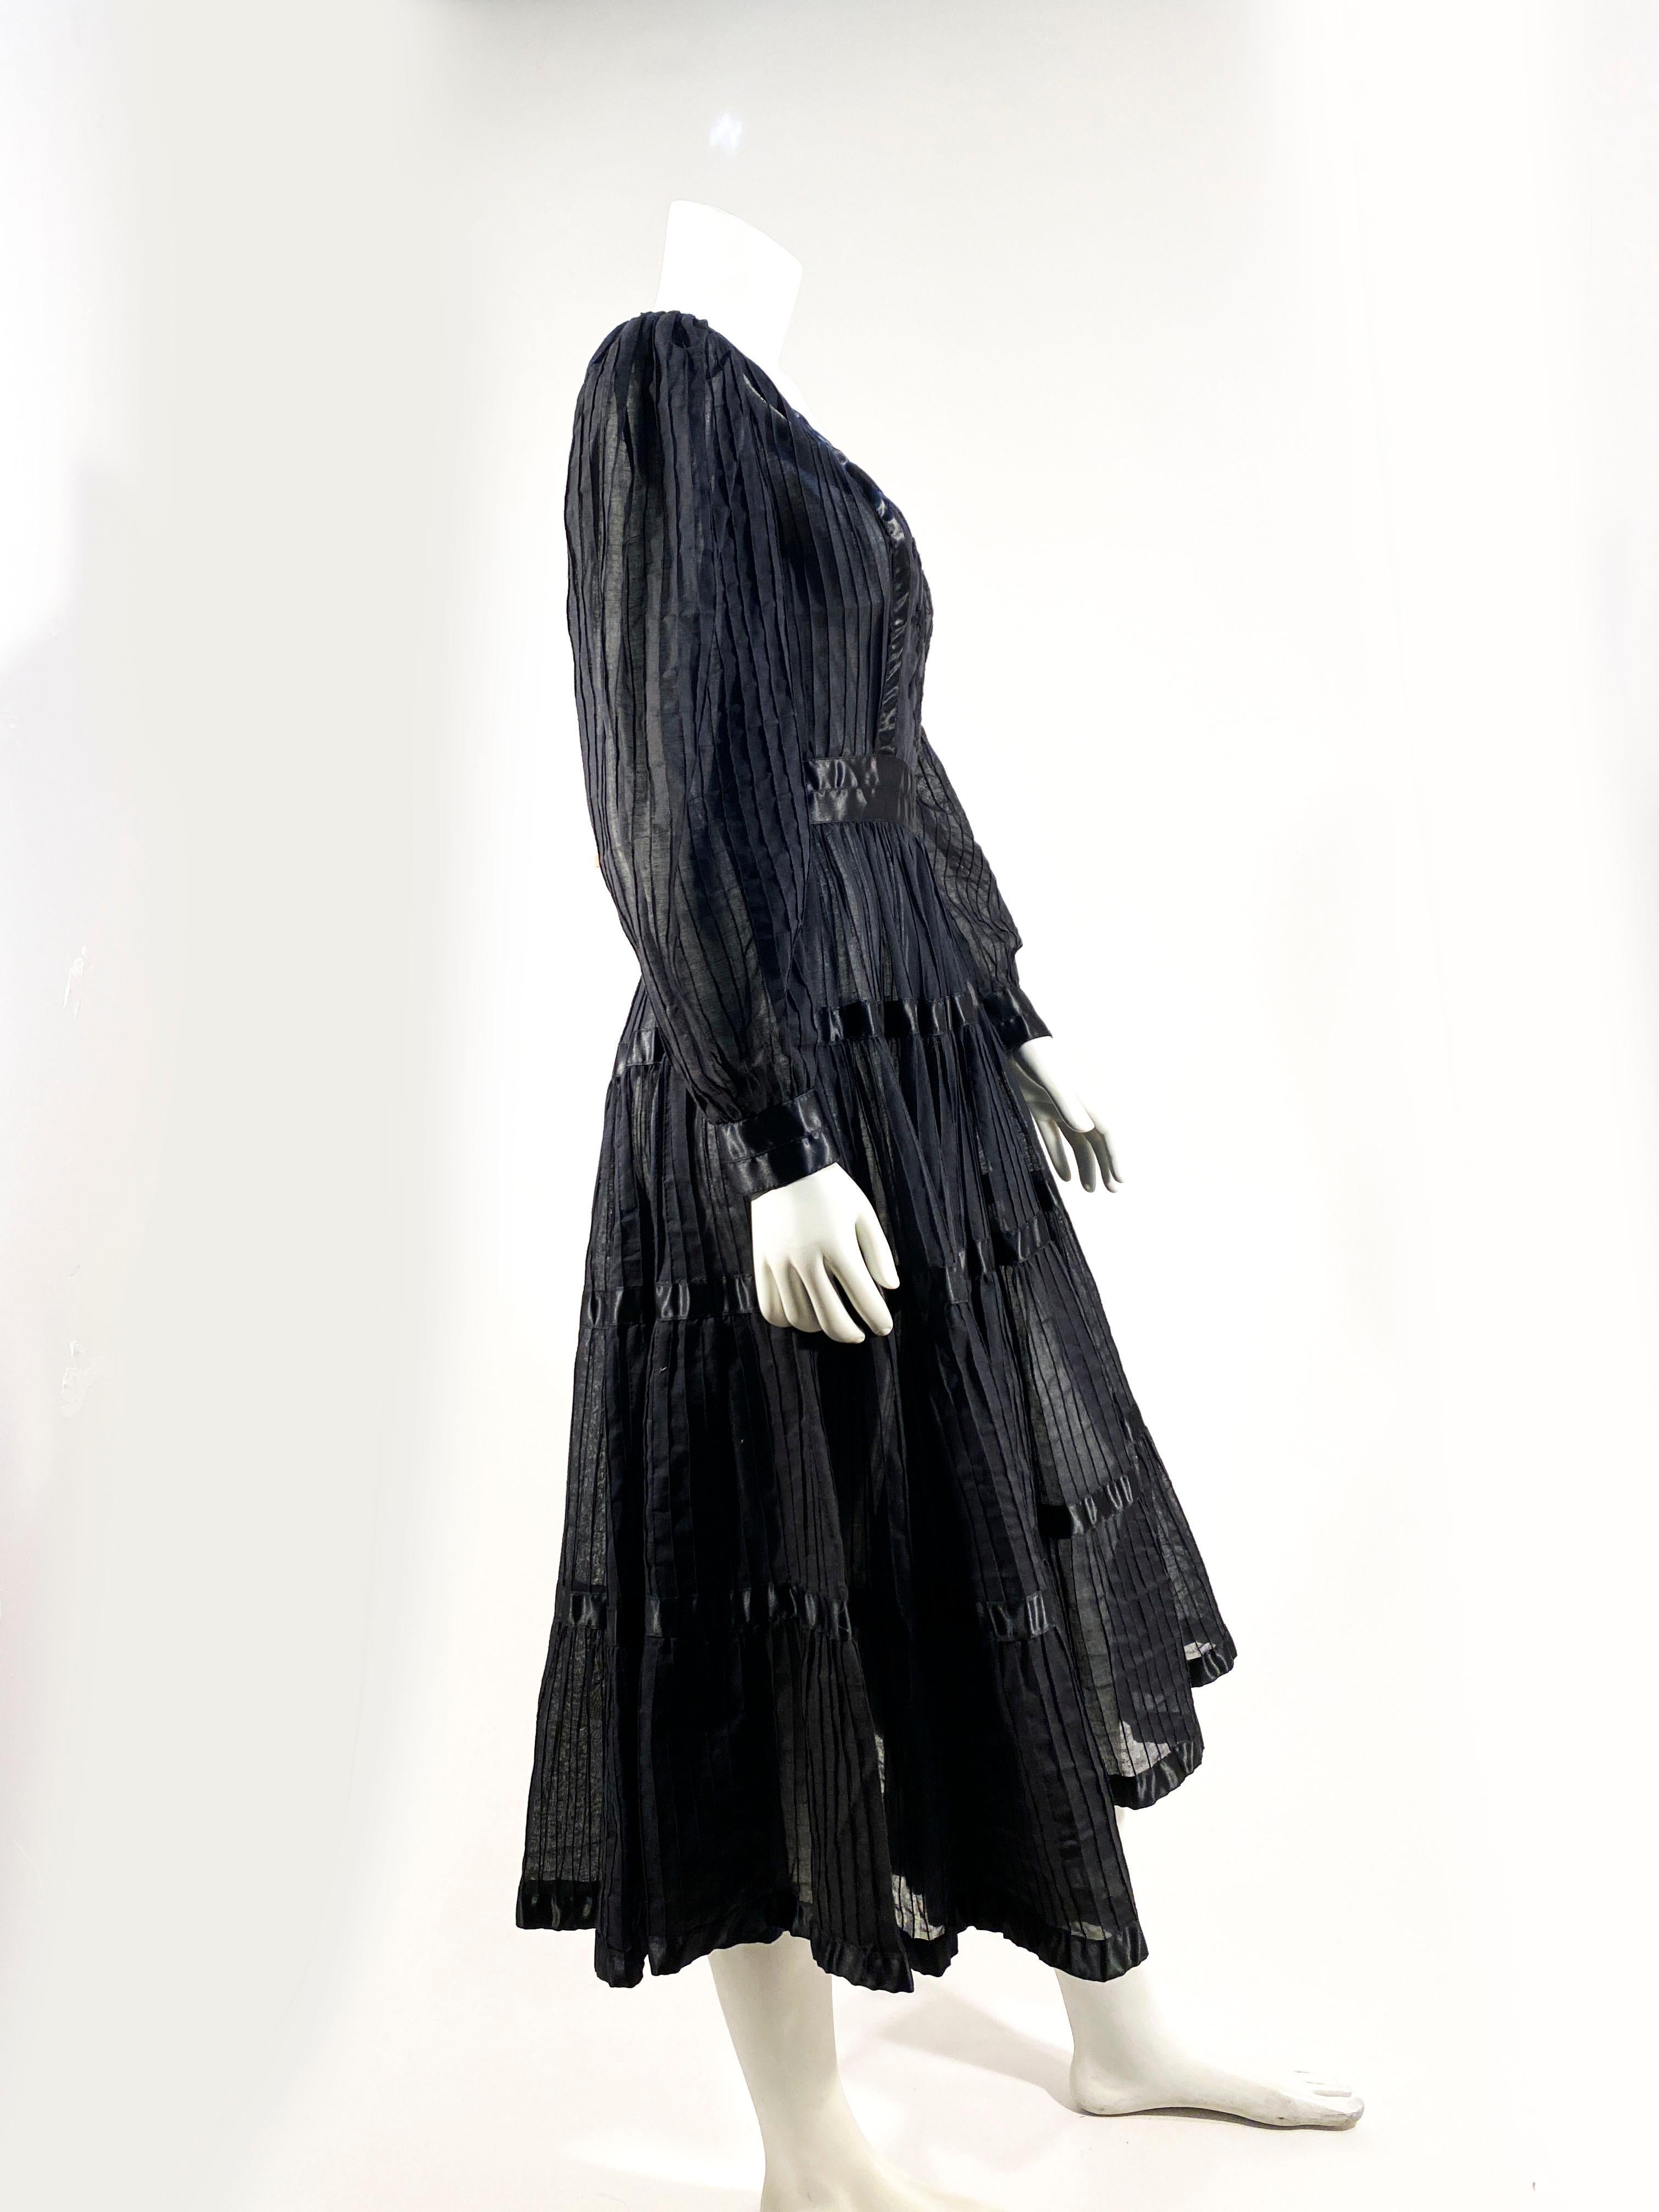 1960s Black Cotton Peasant/Bohemian Dress In Excellent Condition For Sale In San Francisco, CA